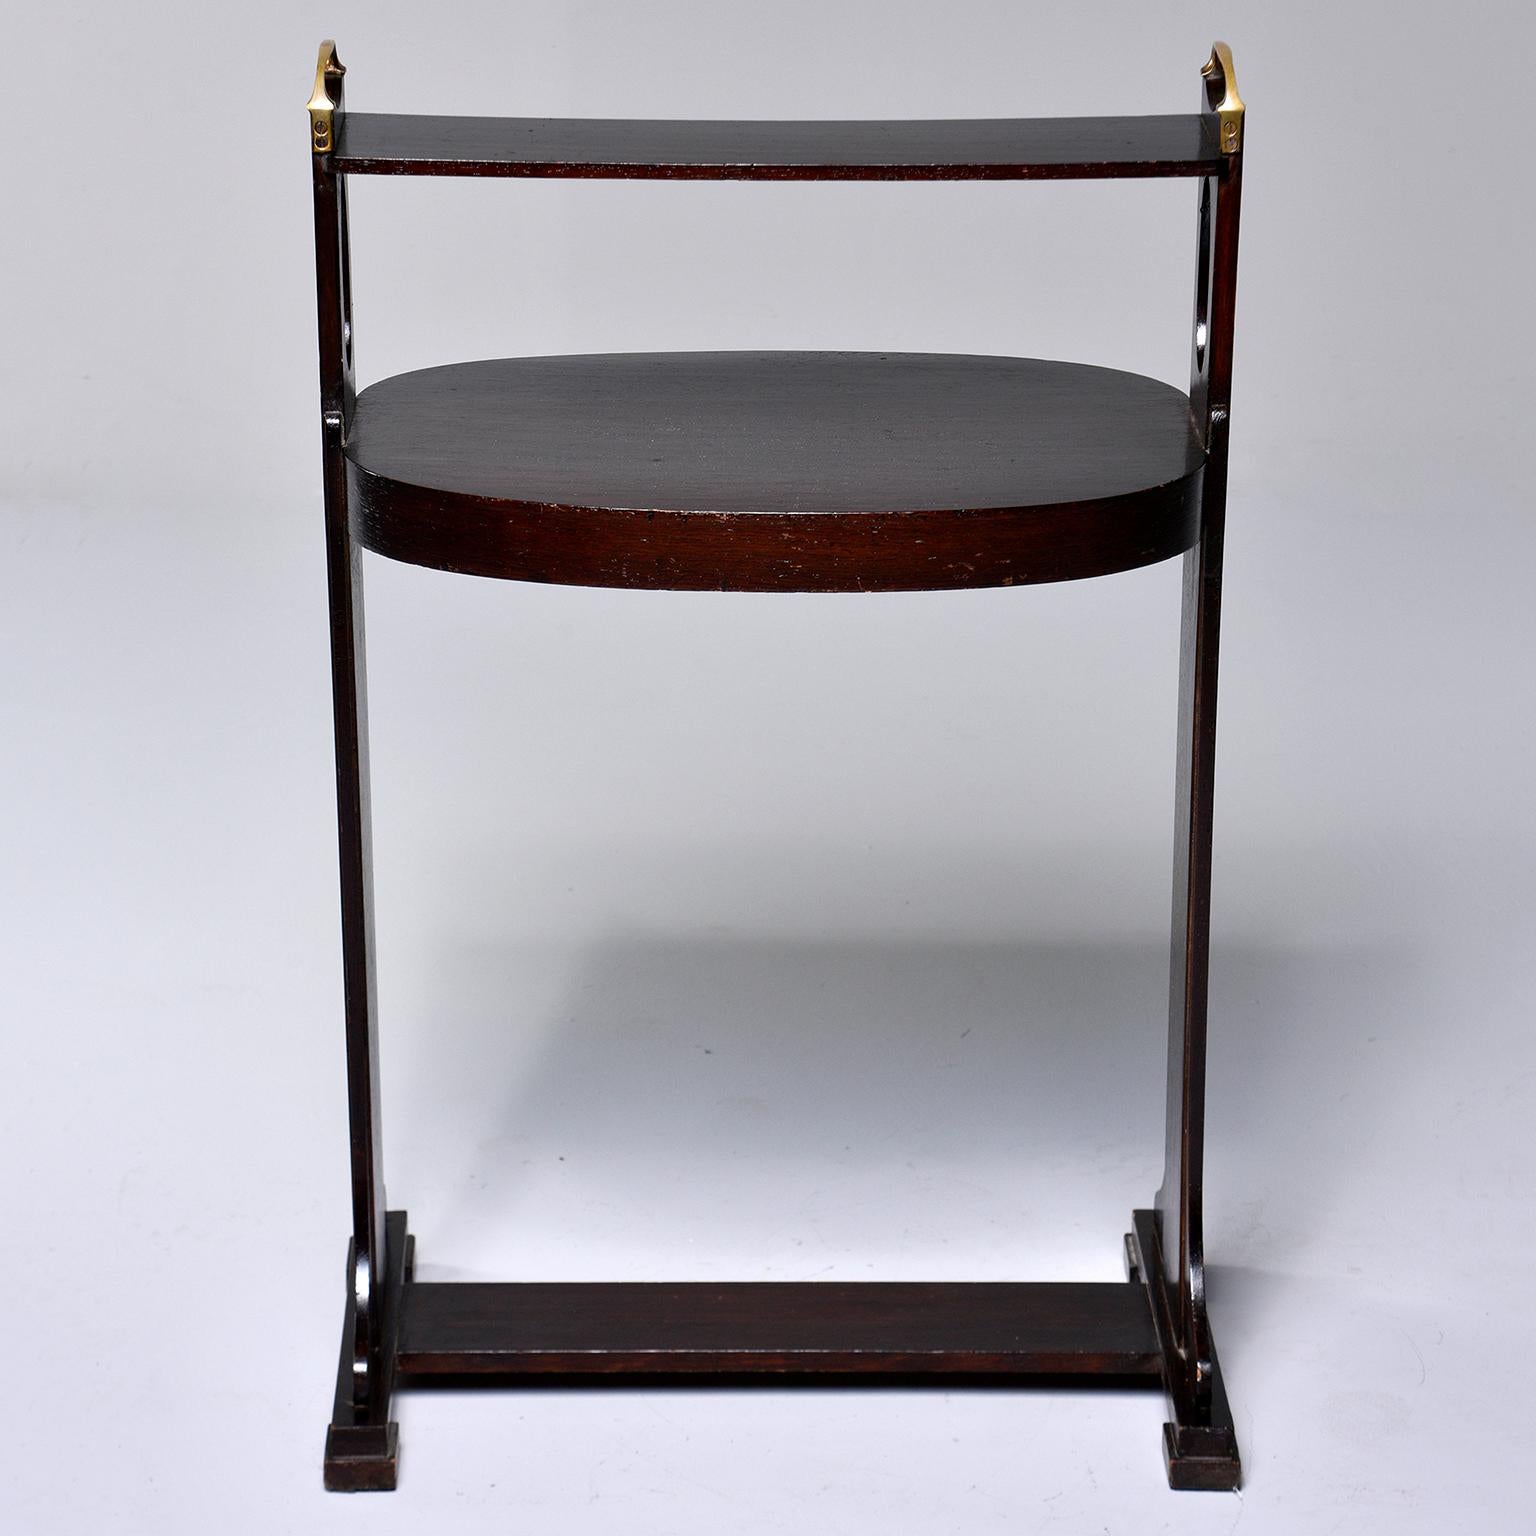 Arts & Crafts dark stained palisander stand or side table, circa 1920s. Footed base with decorative cutout in side supports, oval tabletop and narrow top rail with brass handles. Unknown maker. Found in England.